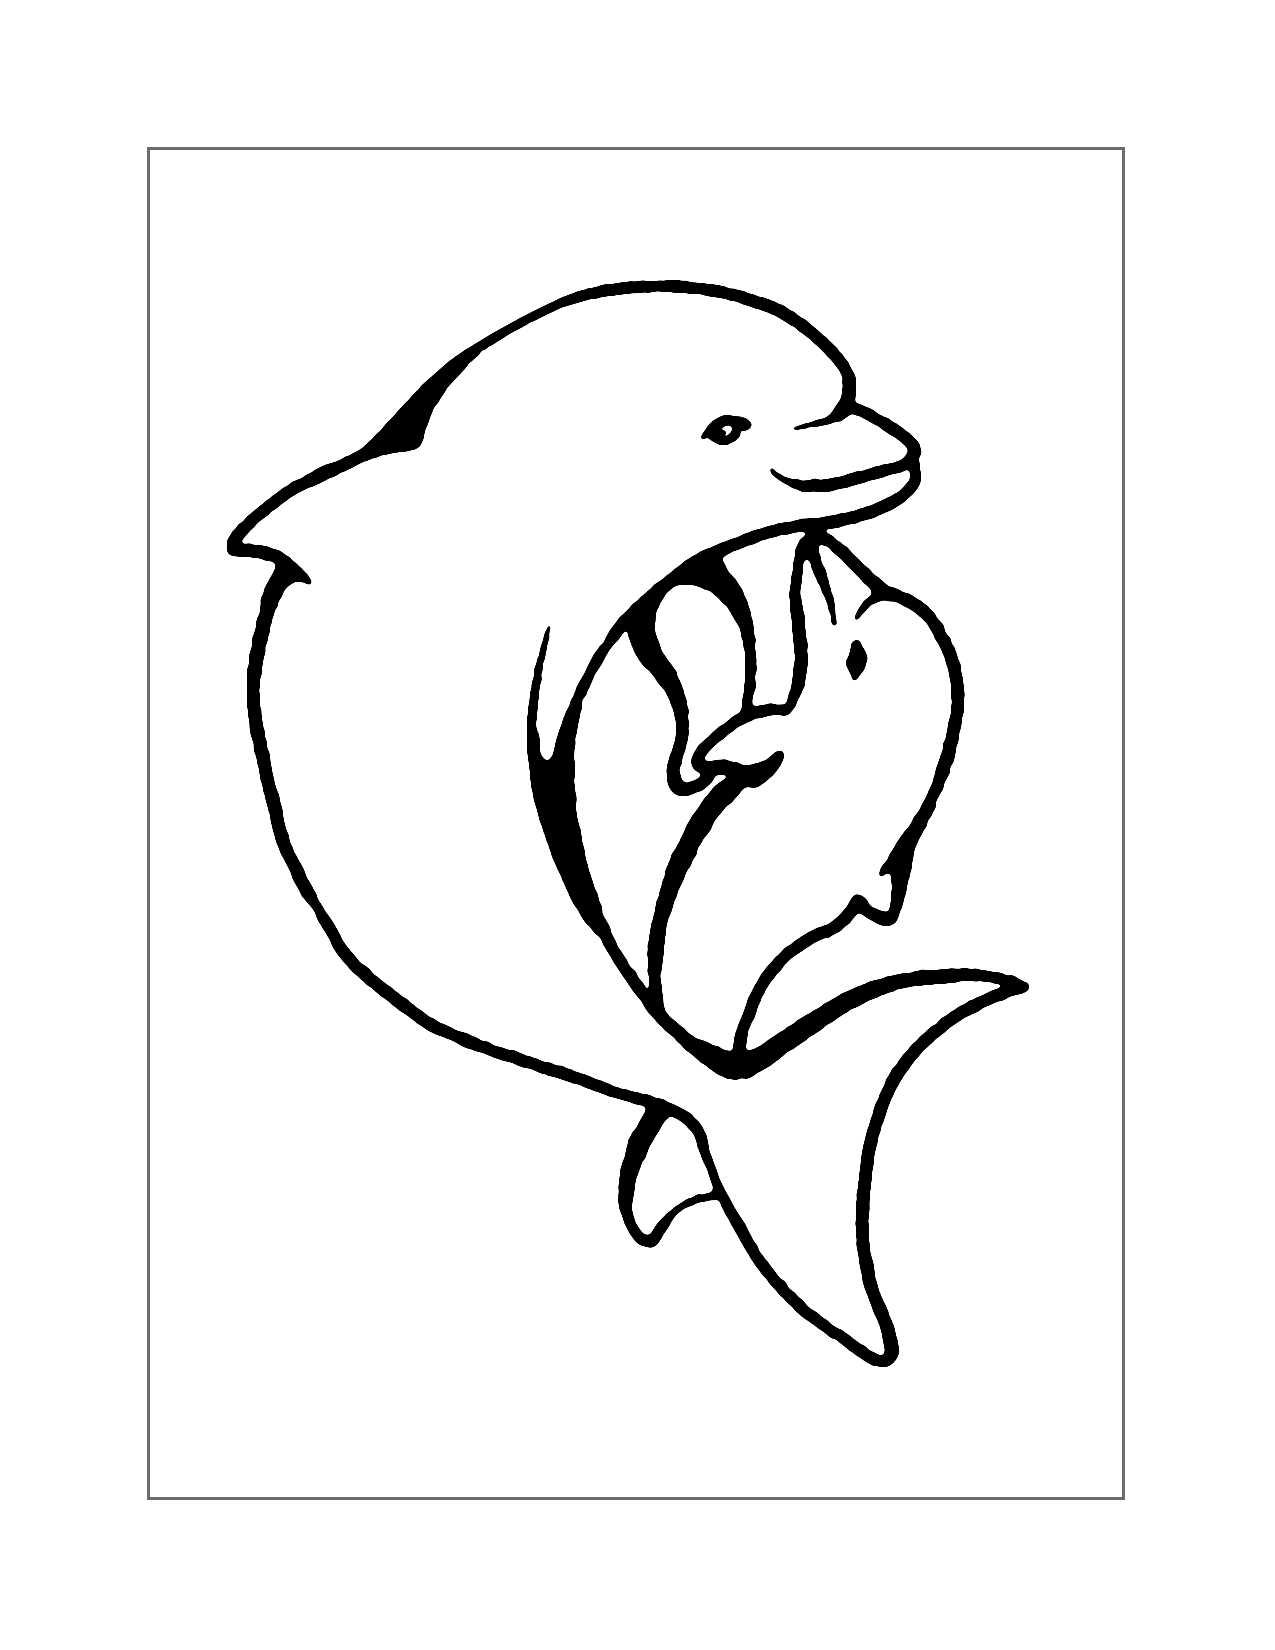 Mom And Baby Dolphin Coloring Page